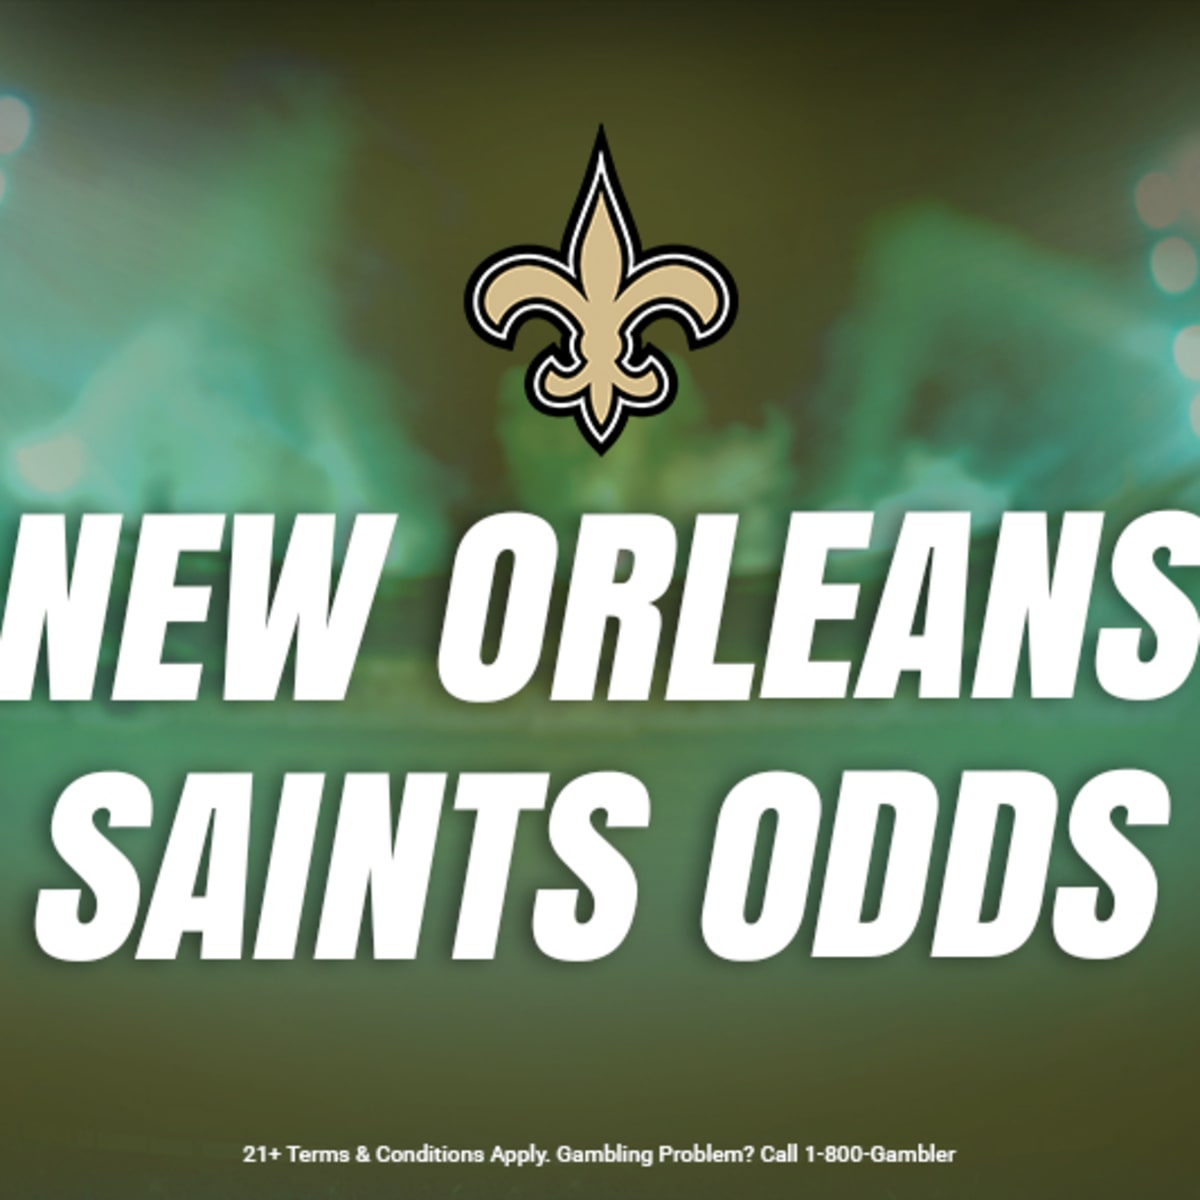 Saints NFL Betting Odds  Super Bowl, Playoffs & More - Sports Illustrated  New Orleans Saints News, Analysis and More